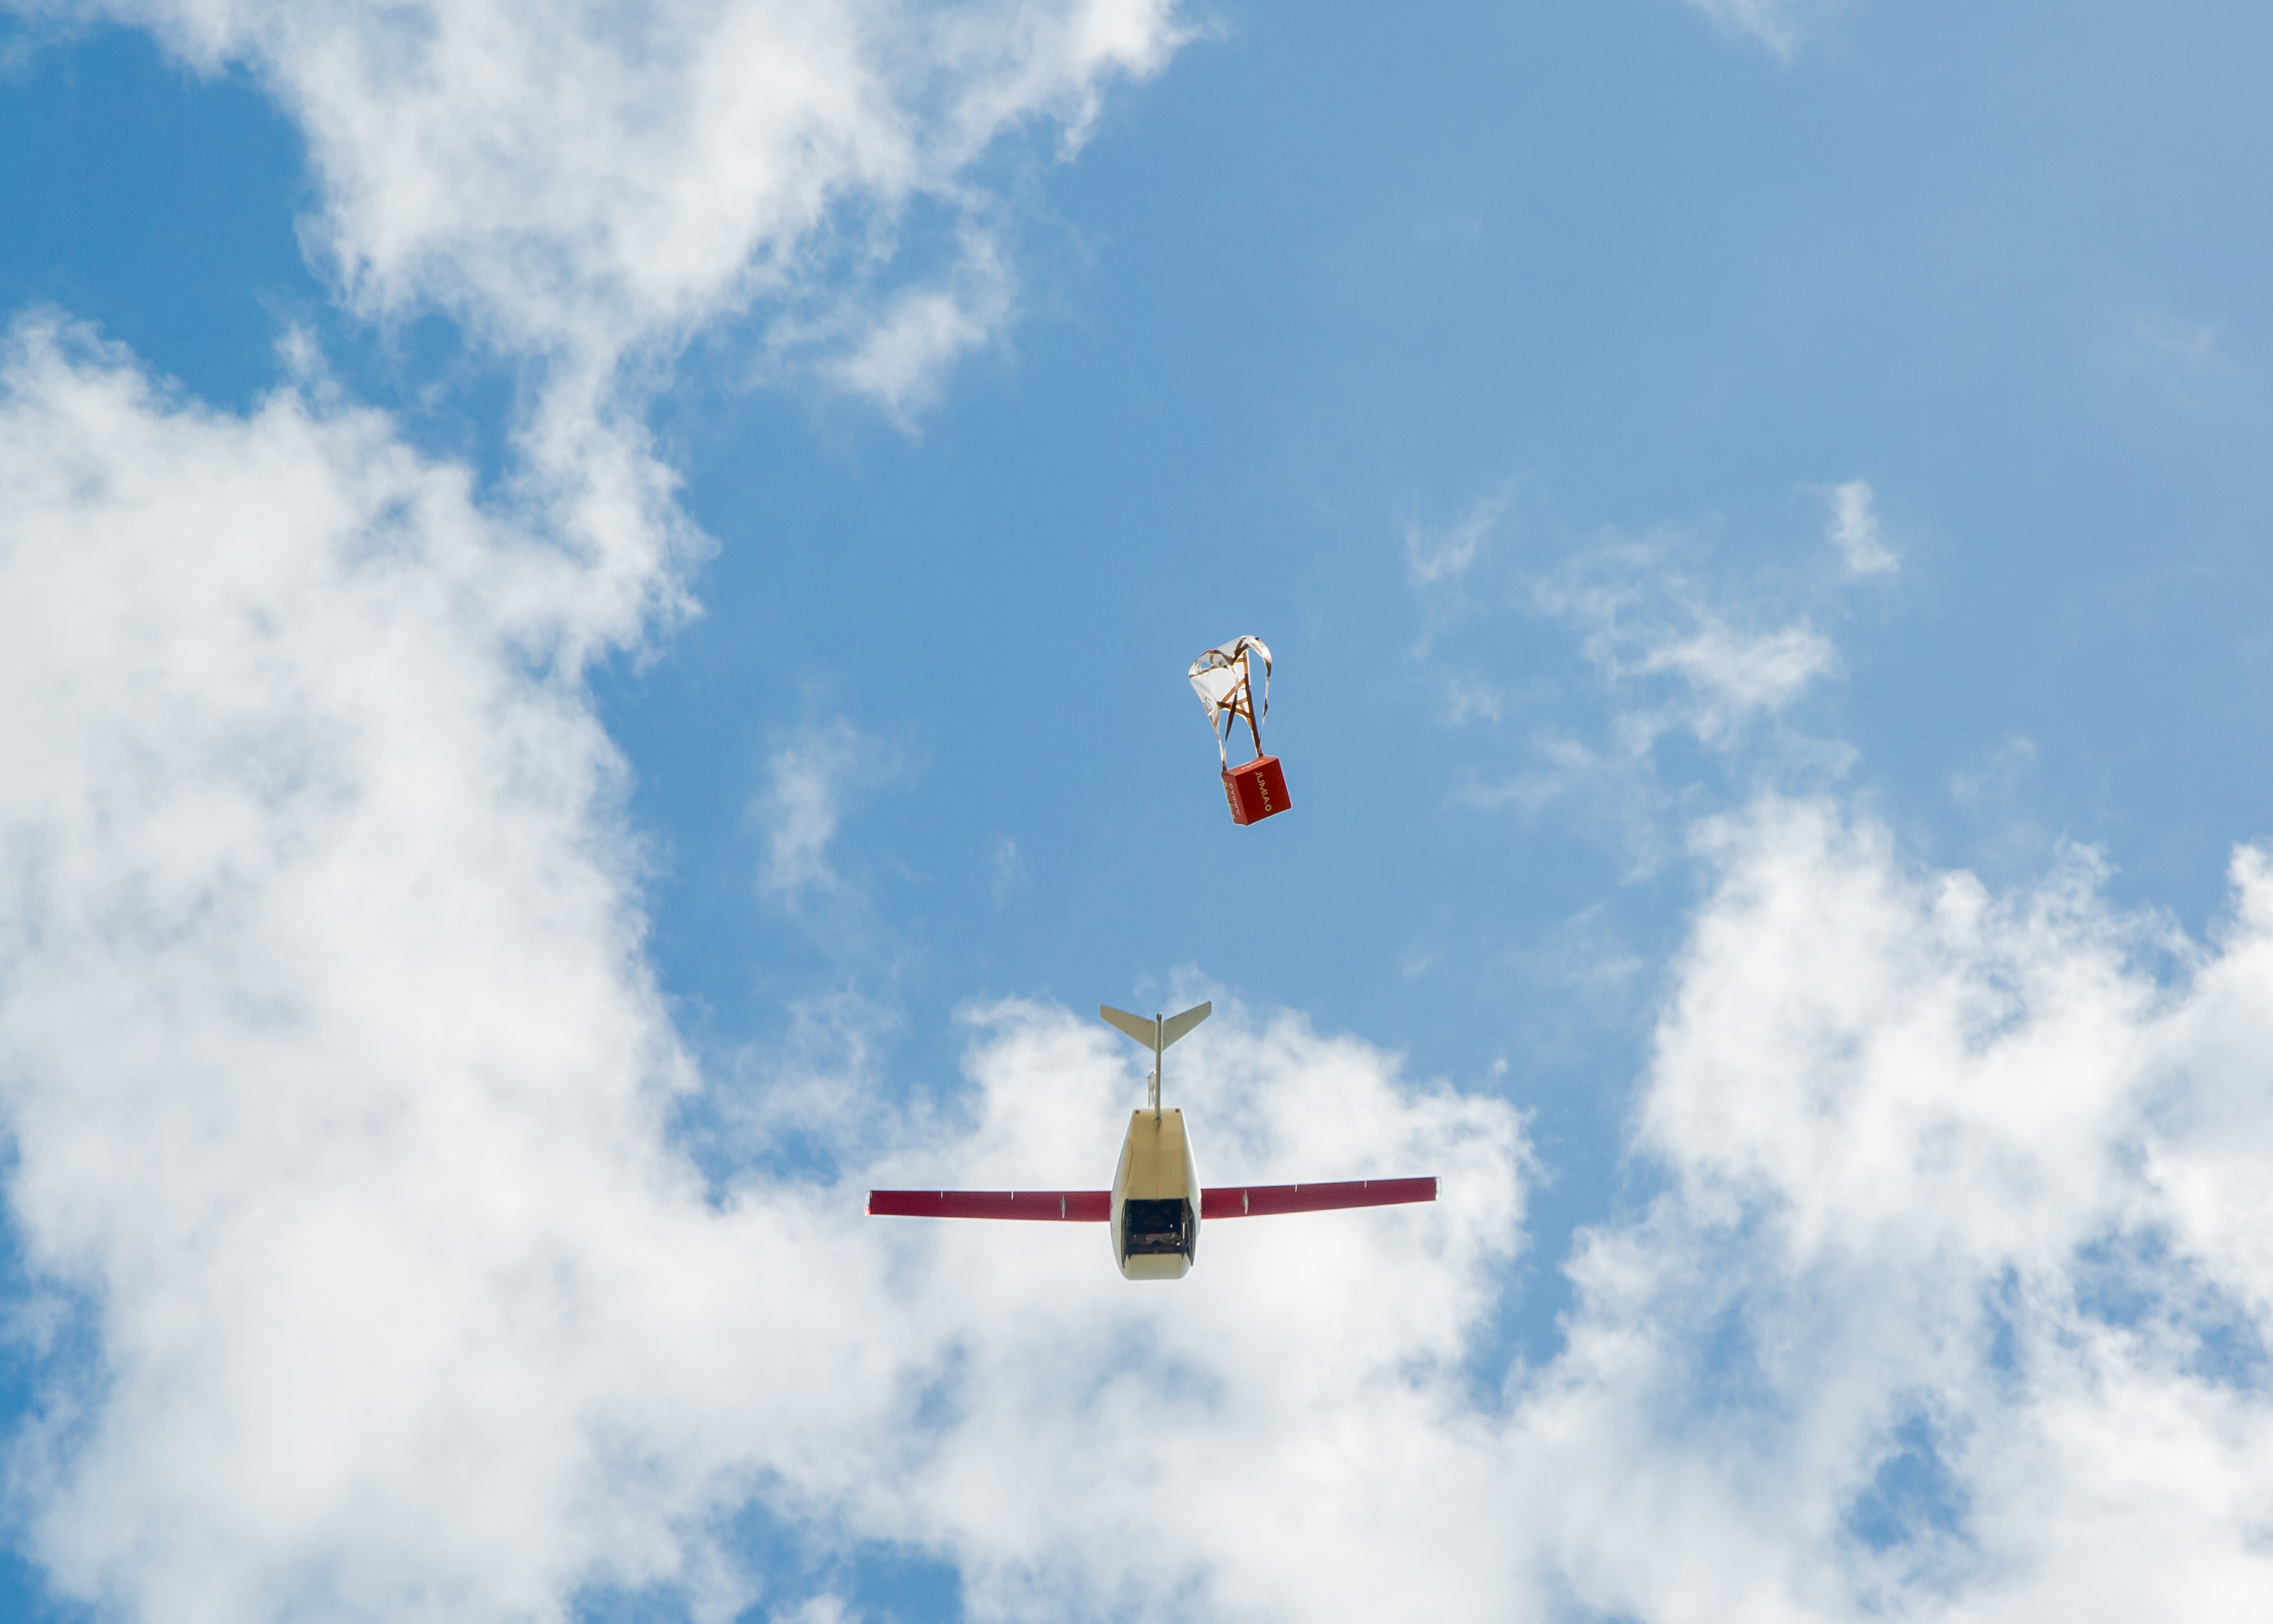 Jumia, Zipline launch drone package delivery in Ghana